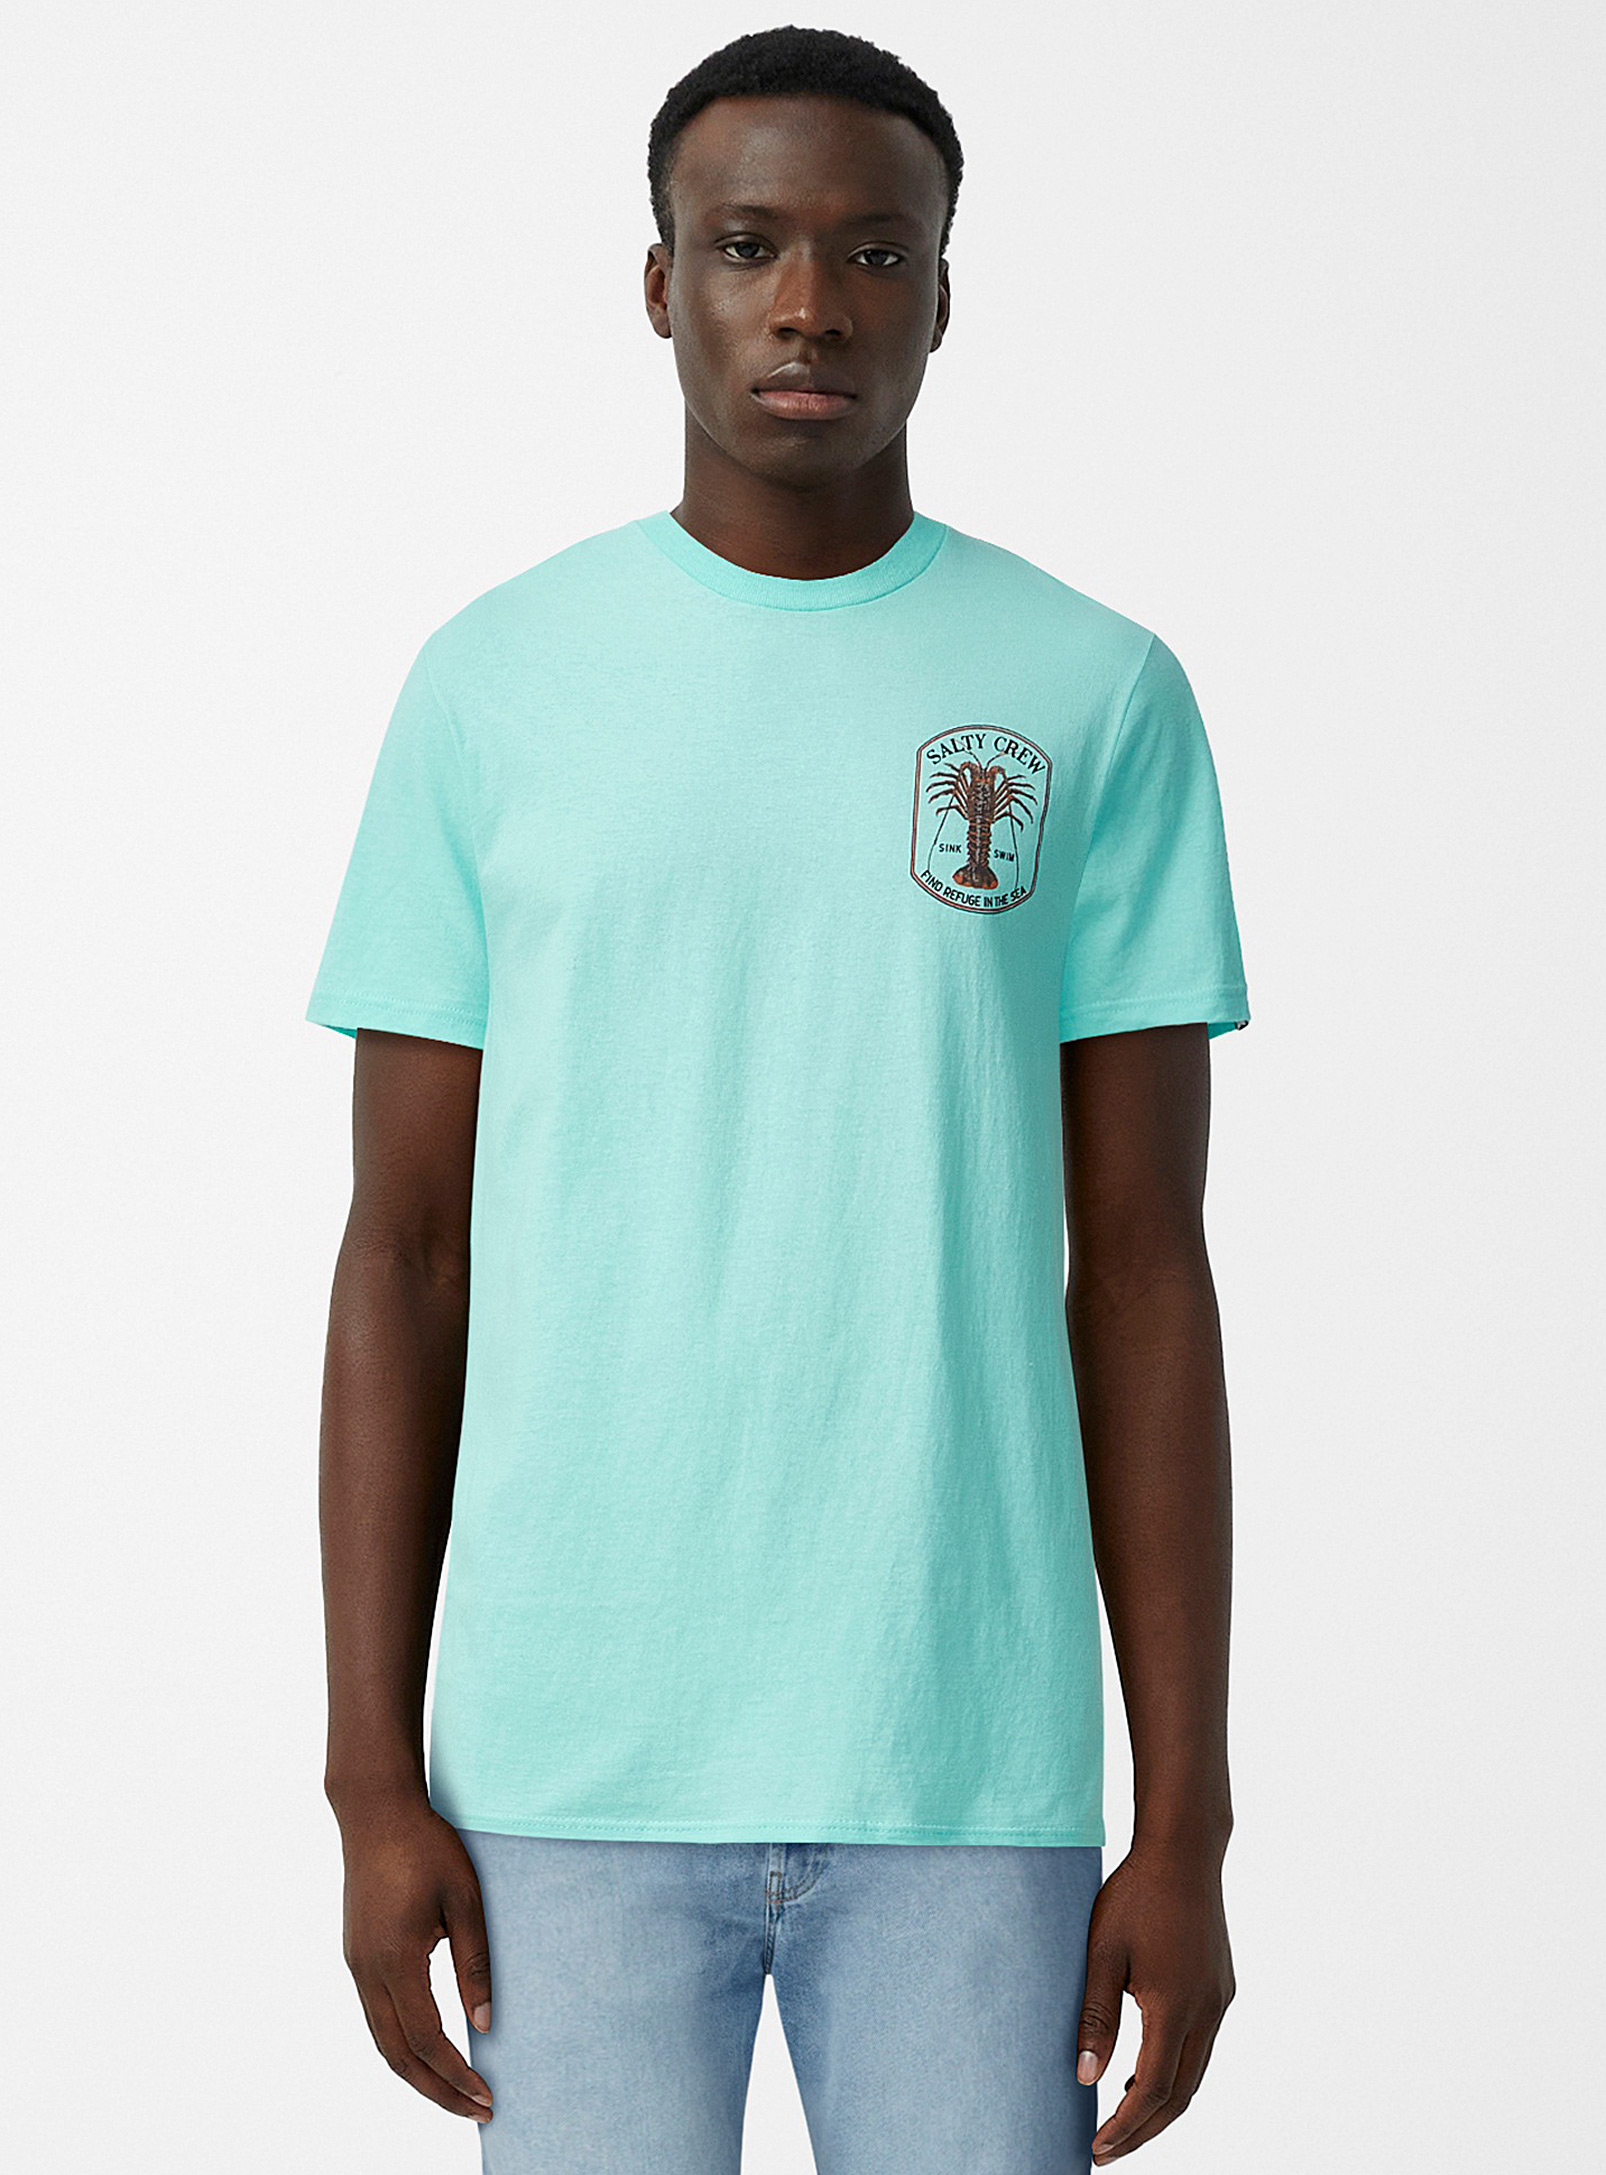 Salty Crew Lobster Logo T-shirt In Teal